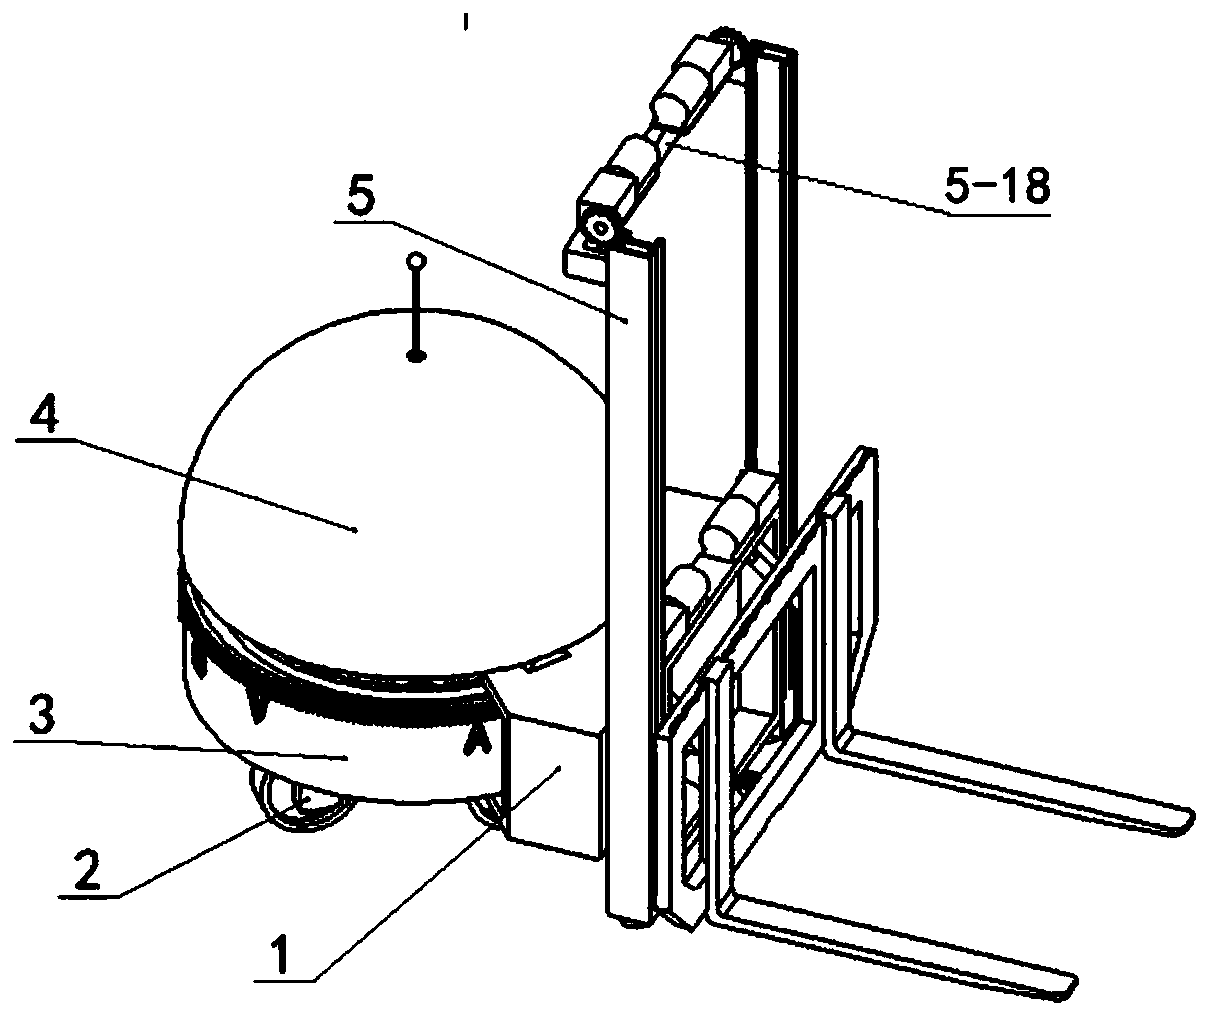 Forklift device with high degree of freedom